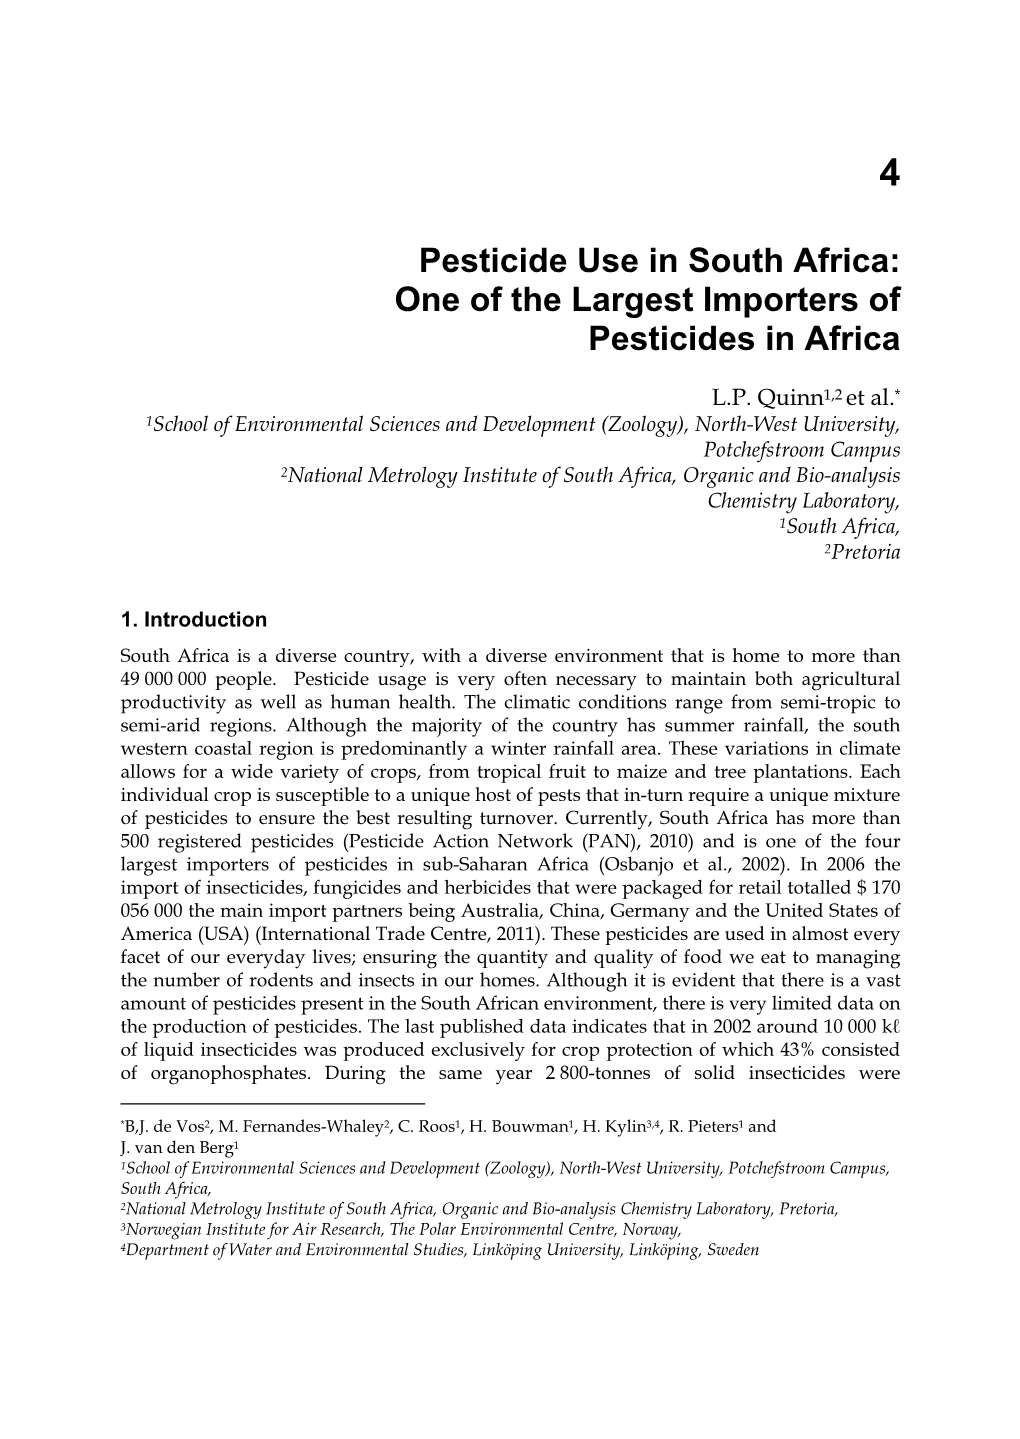 Pesticide Use in South Africa: One of the Largest Importers of Pesticides in Africa